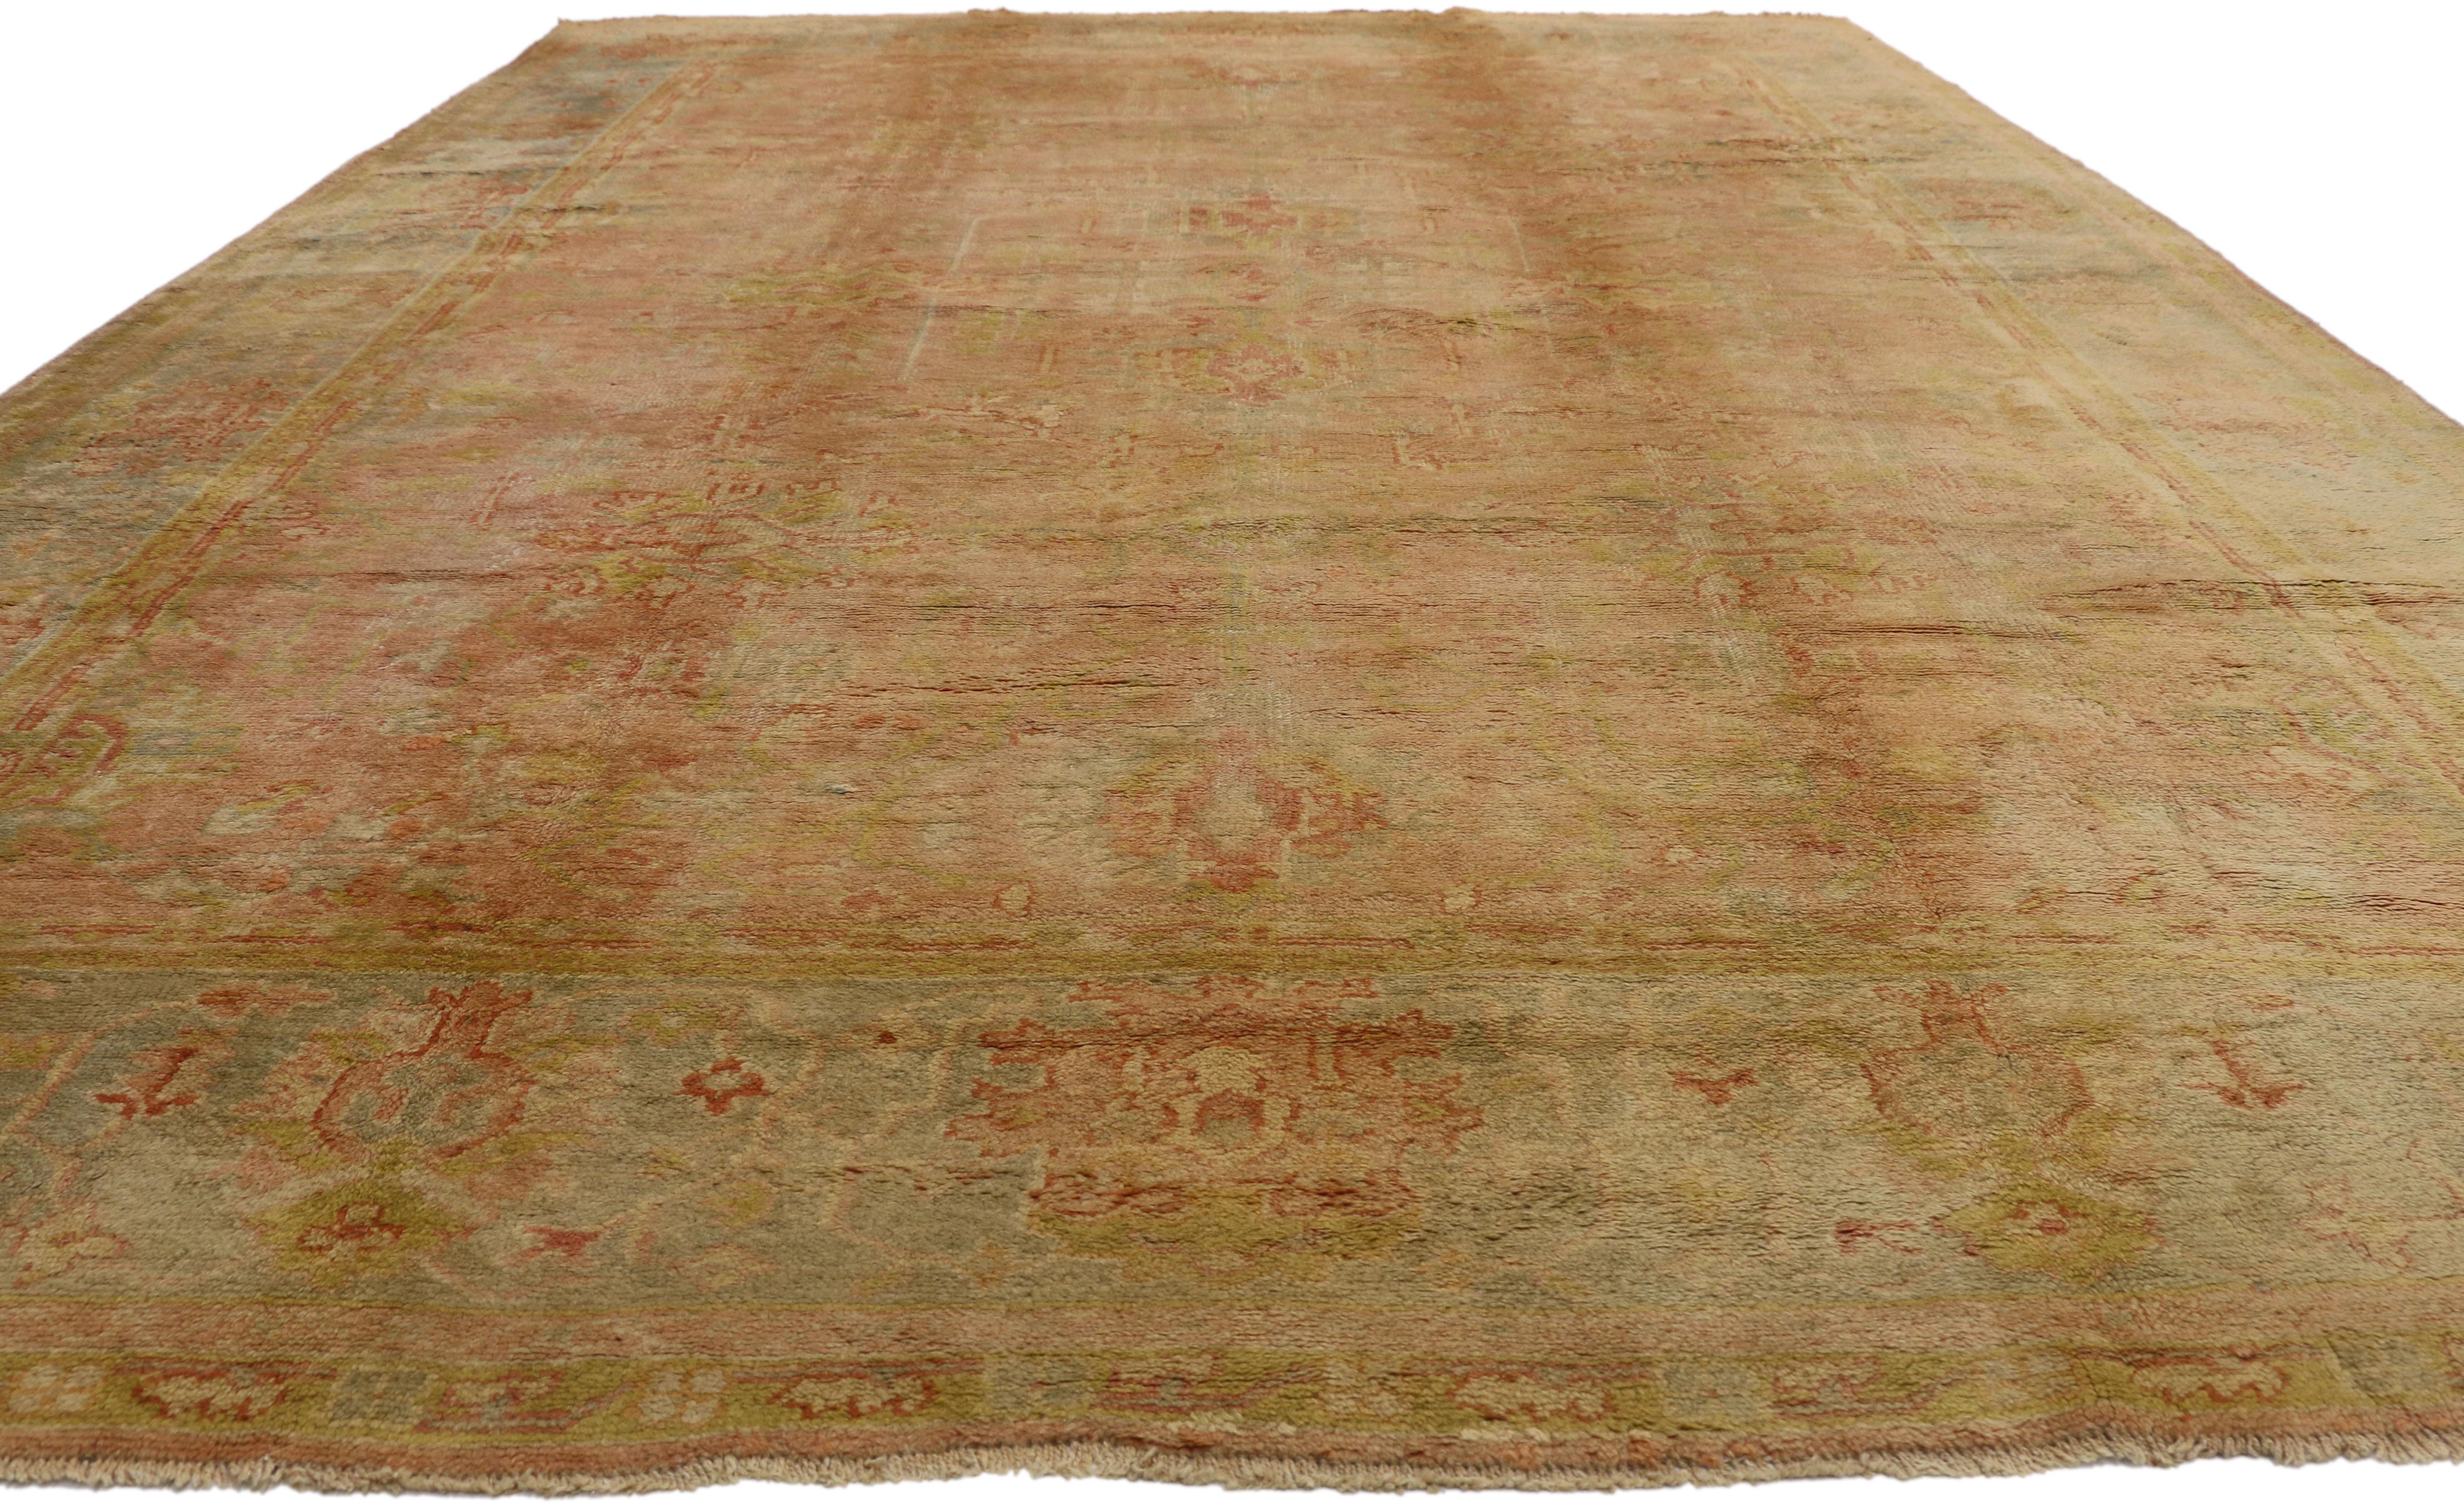 French Provincial Antique Turkish Oushak Rug, Spanish Eclectic Meets Sunbaked Elegance For Sale